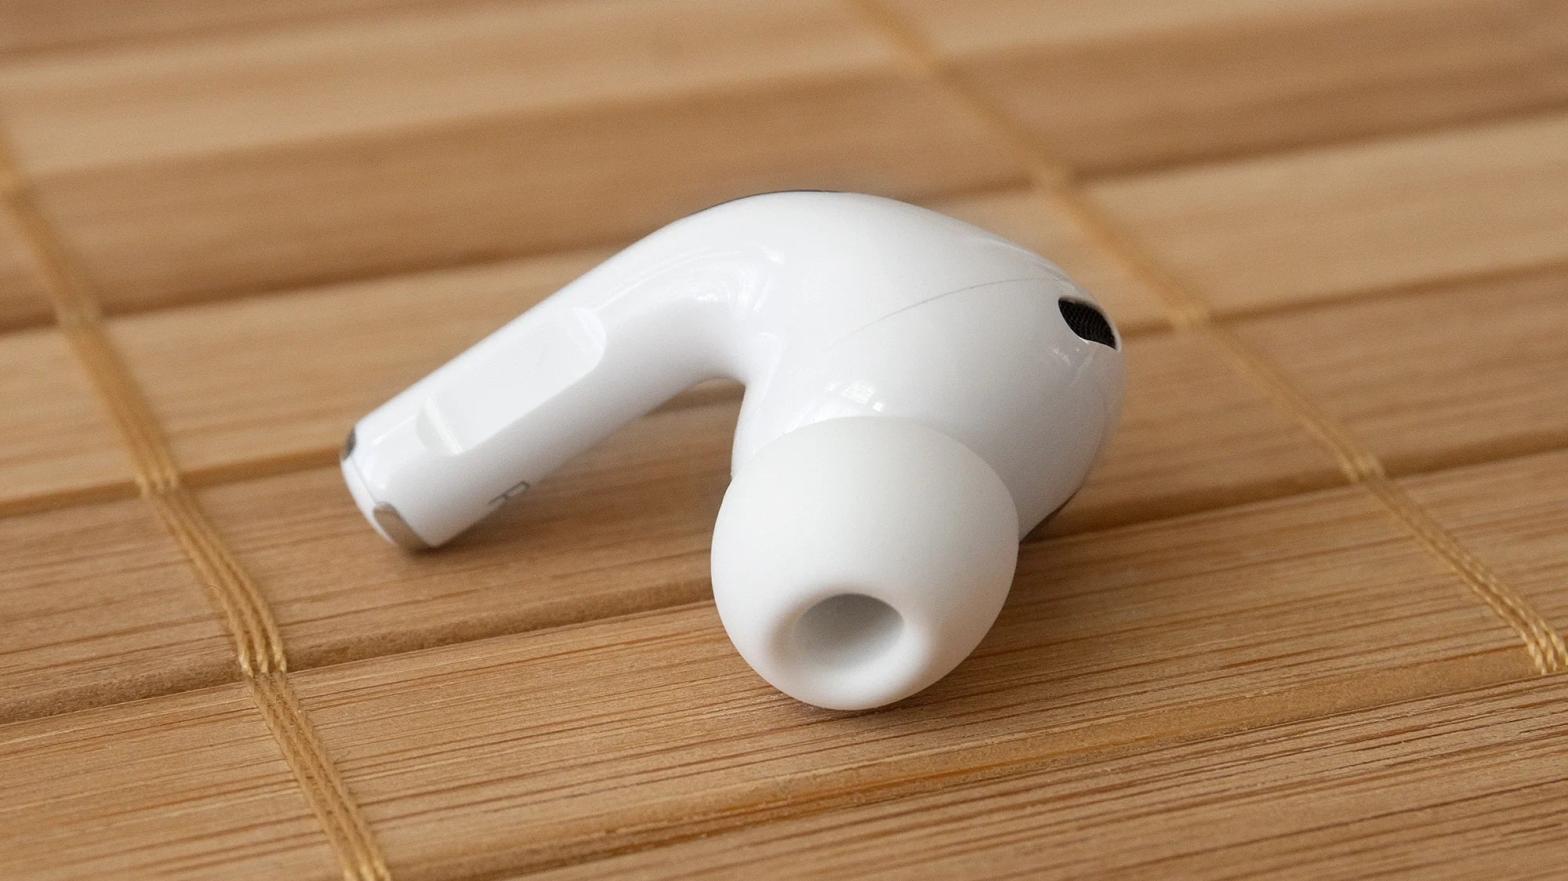 Apple is reportedly working on ways the AirPods could become a part-time medical device for reading users' temperature and guesstimating hearing loss. (Photo: Andrew Liszewski / Gizmodo)